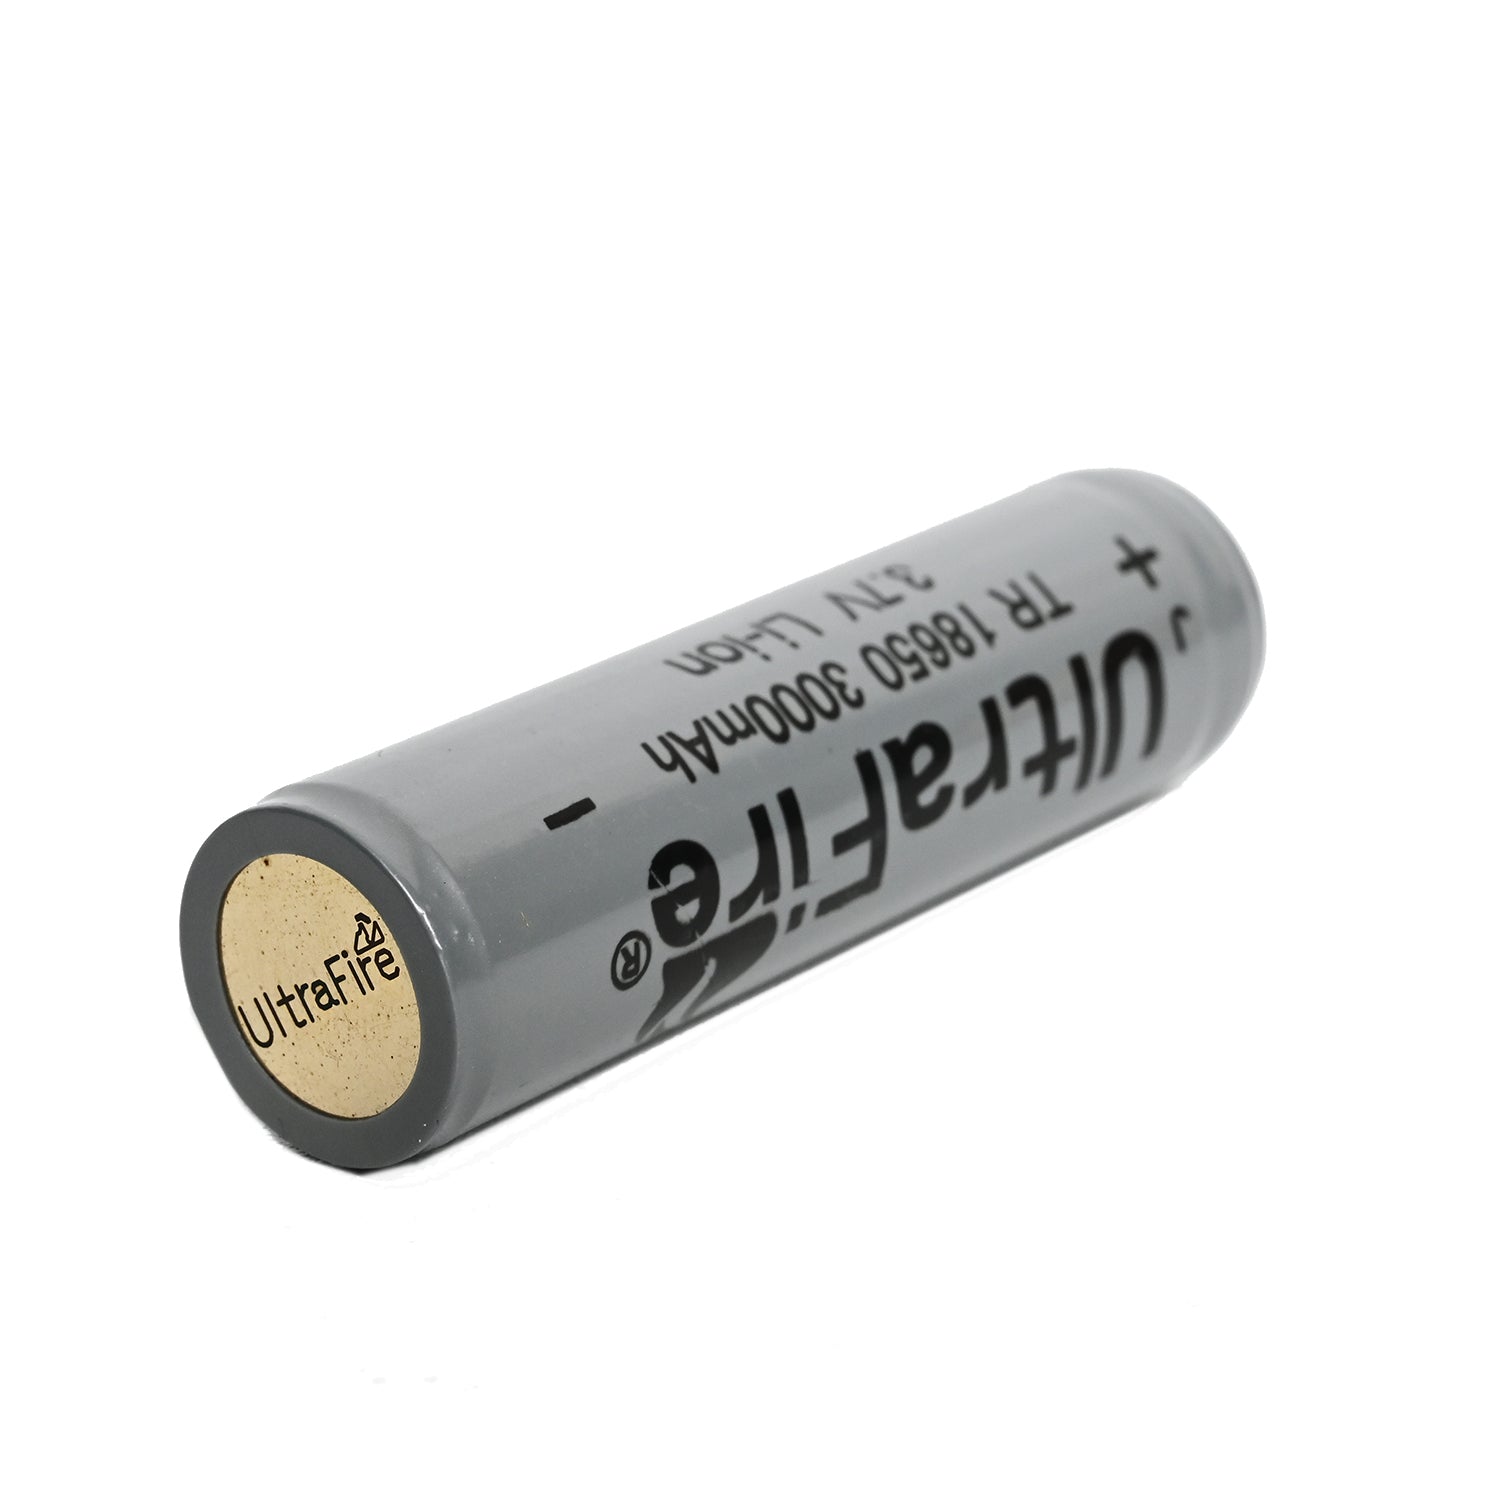 UltraFire 18650 Rechargeable Lithium Battery